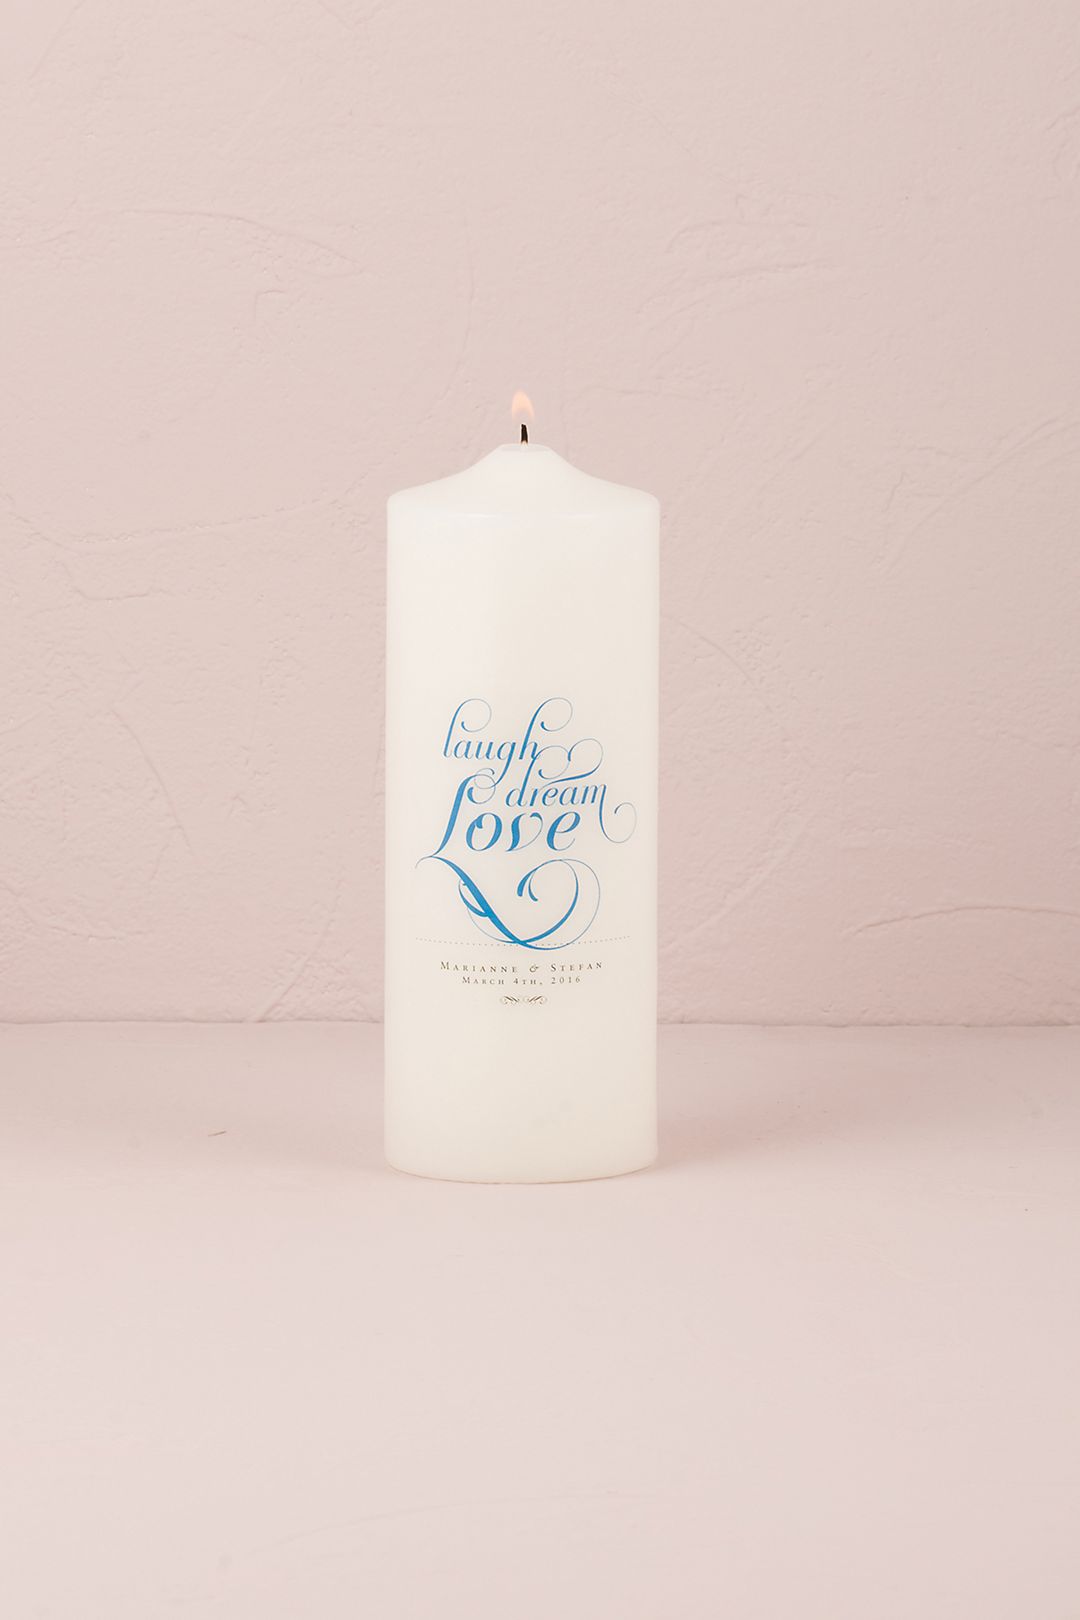 Personalized Expressions Unity Candle Image 3